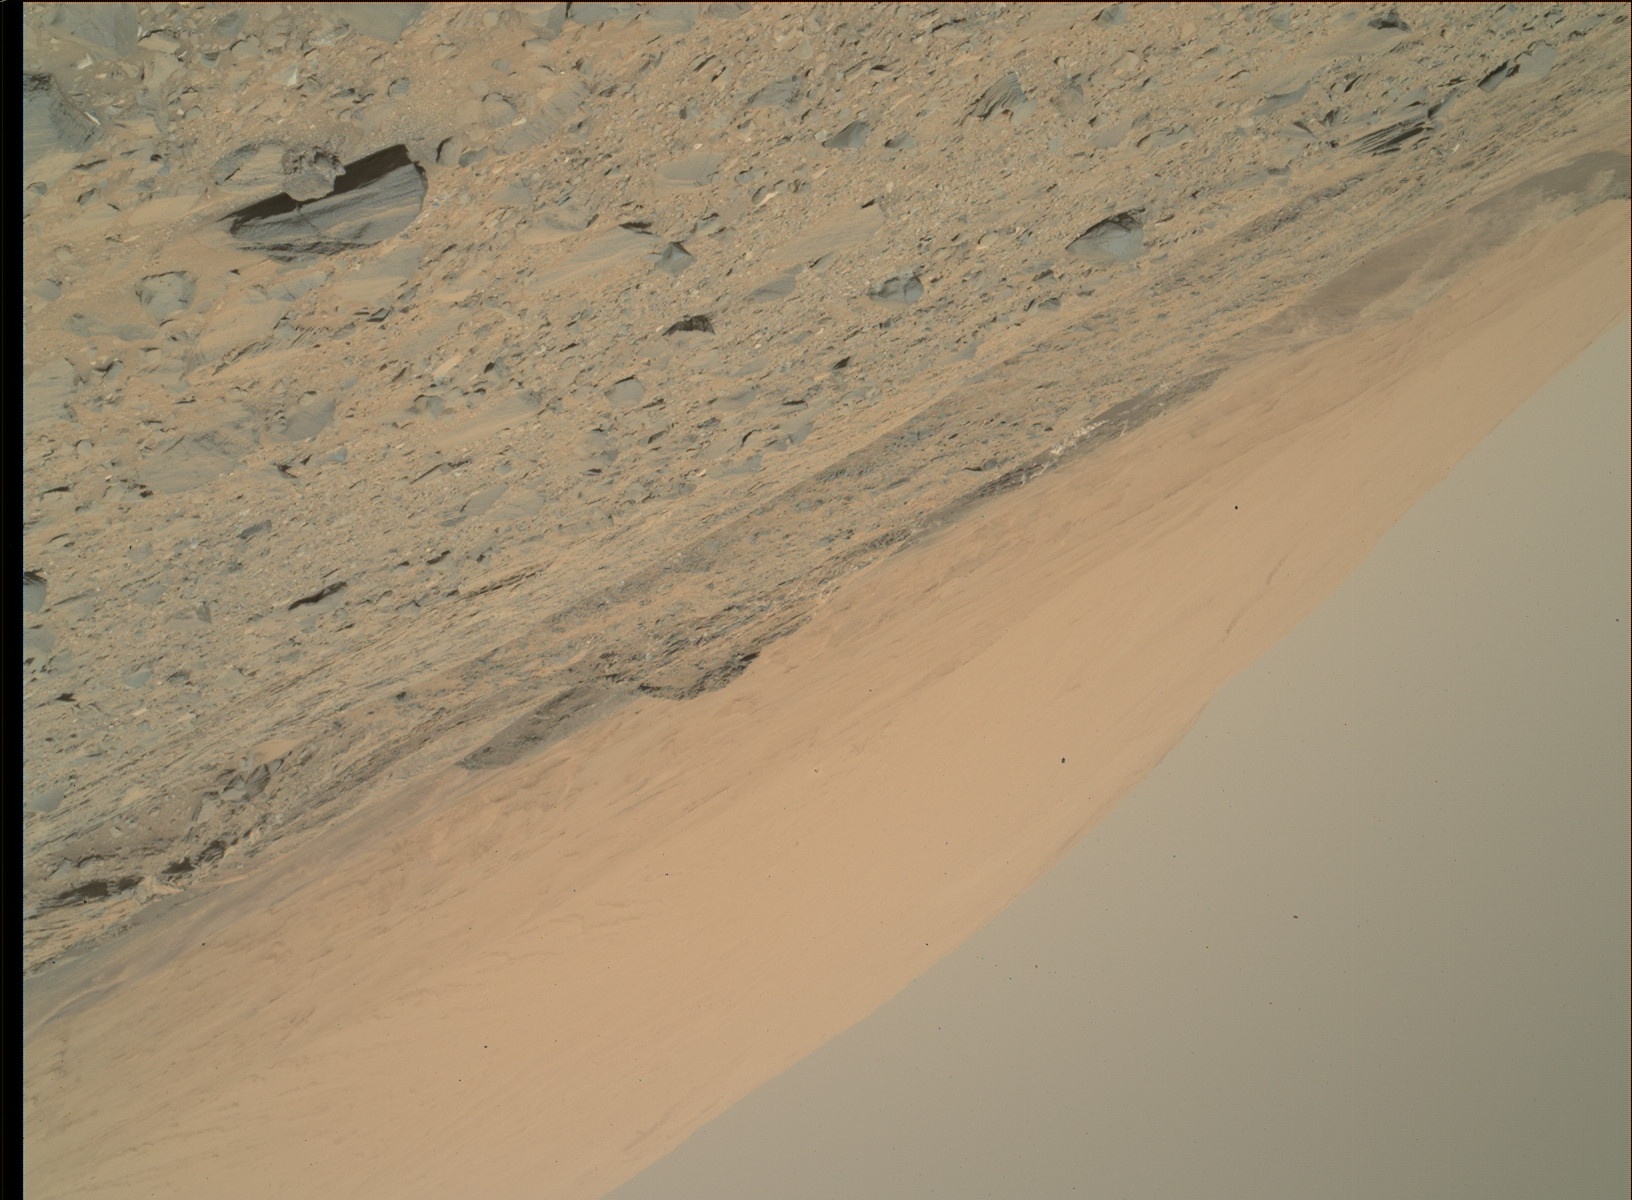 Nasa's Mars rover Curiosity acquired this image using its Mars Hand Lens Imager (MAHLI) on Sol 1100